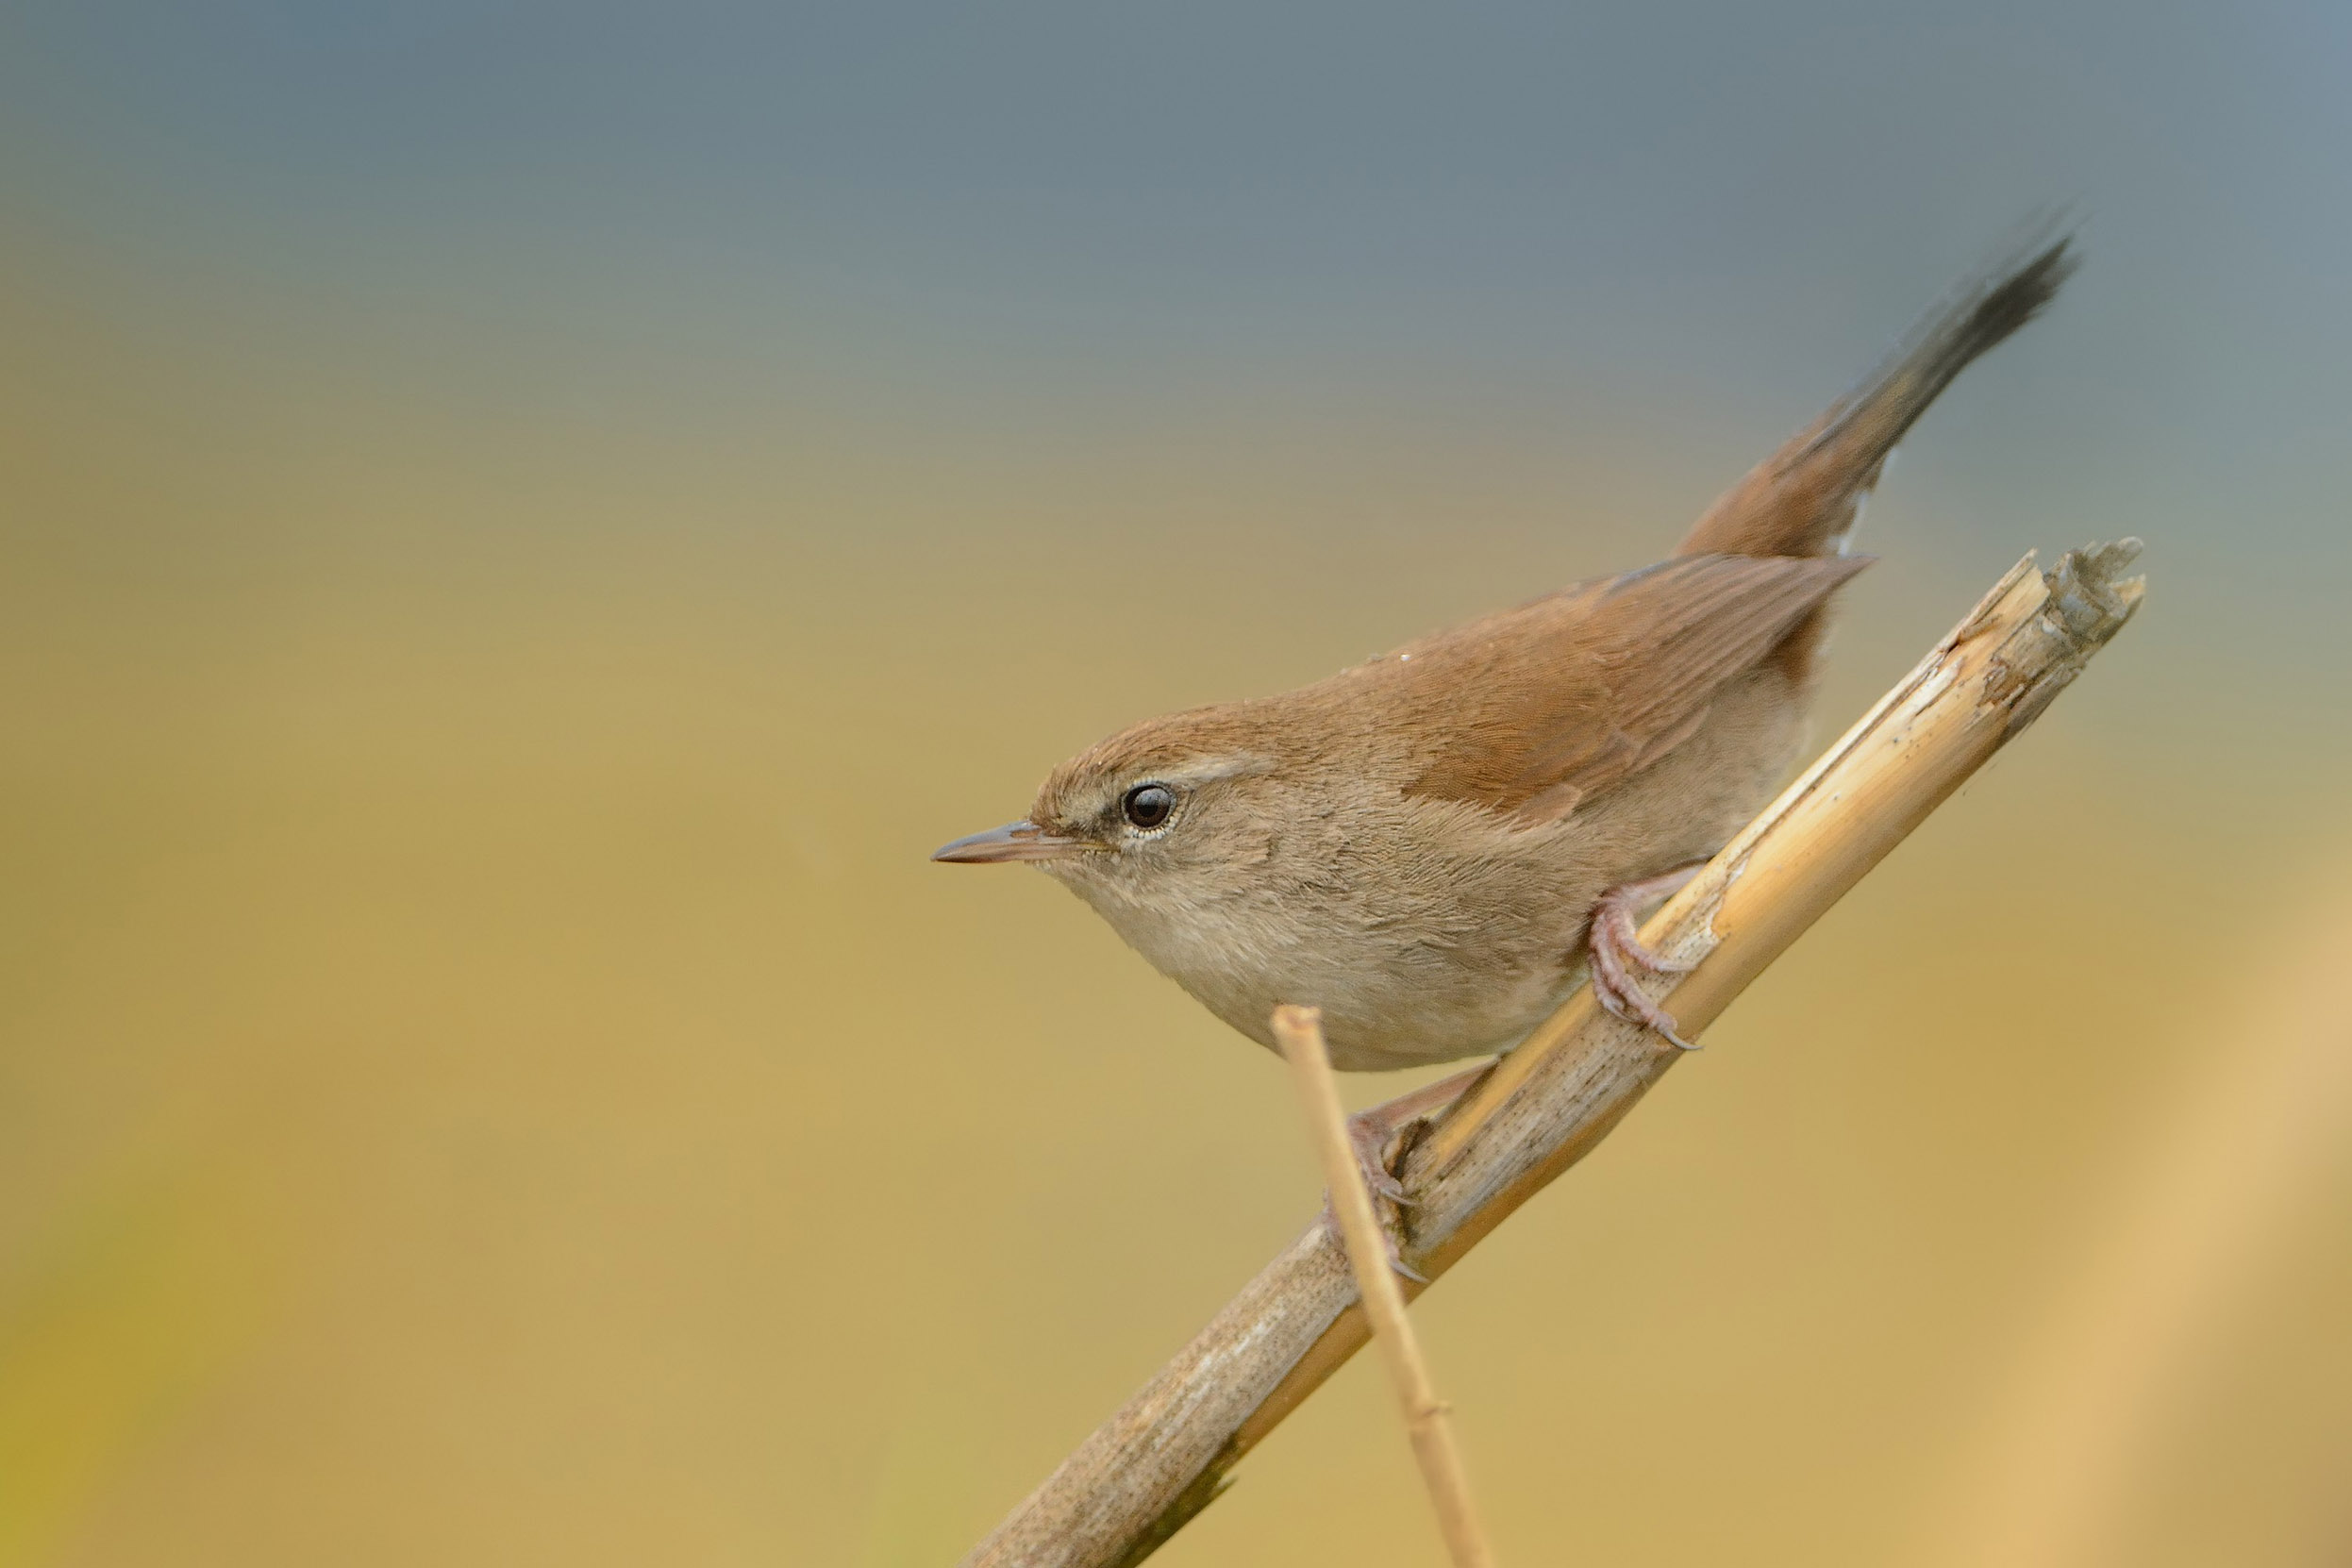 A lone Cetti's Warbler perched on a stick against a dusty orange background.